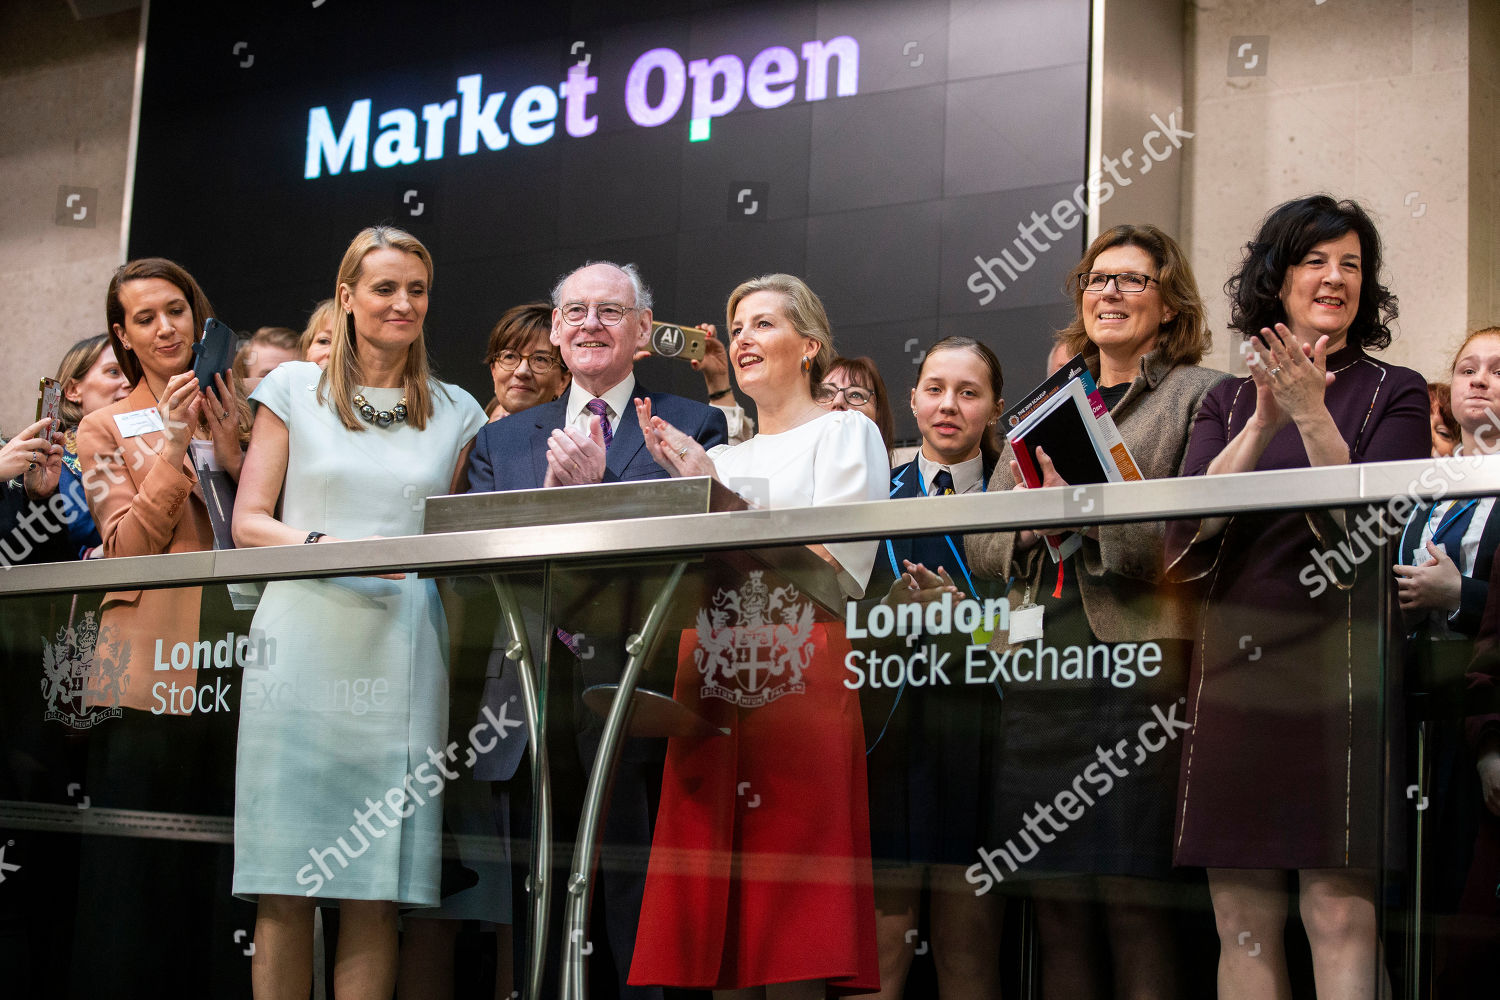 sophie-countess-of-wessex-attends-womens-network-forum-and-market-opening-ceremony-international-womens-day-london-uk-08-mar-2019-shutterstock-editorial-10147941ad.jpg